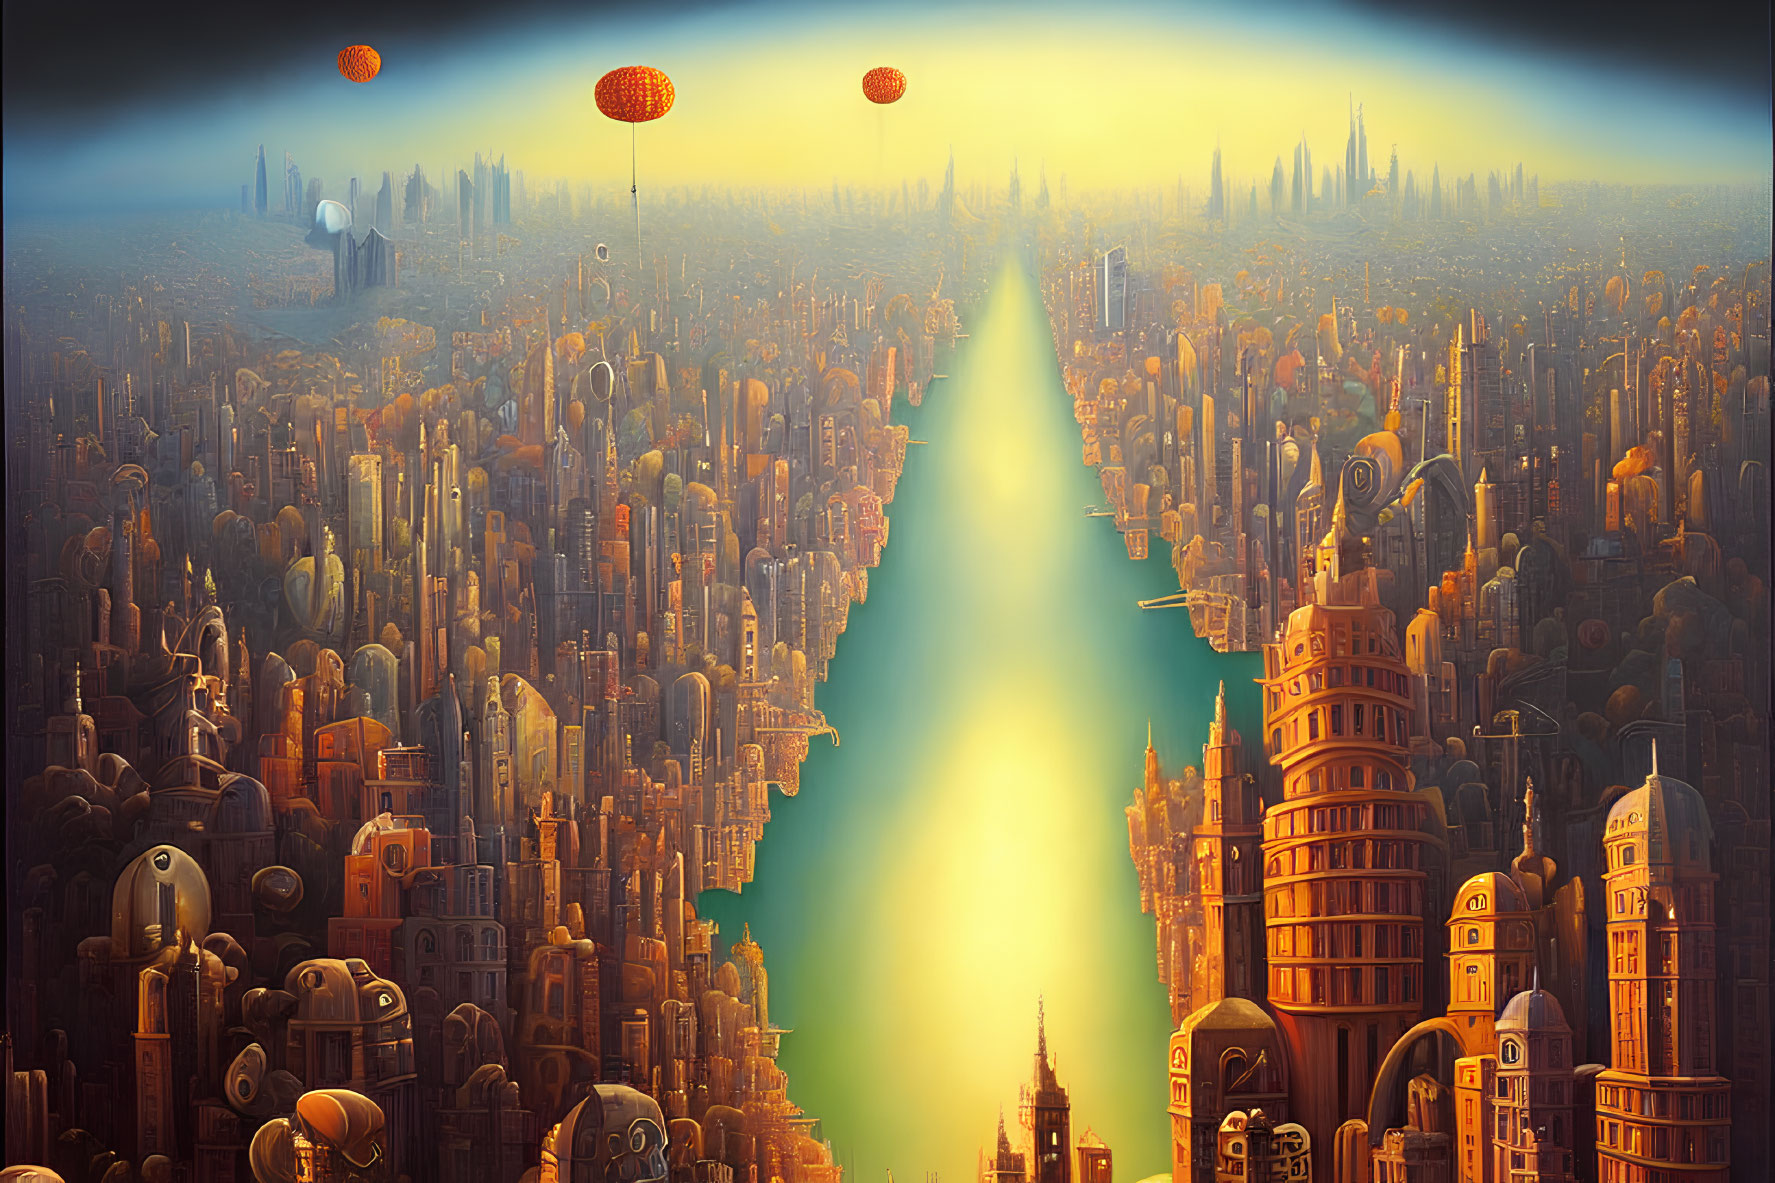 Futuristic cityscape with skyscrapers, glowing river, and floating lanterns